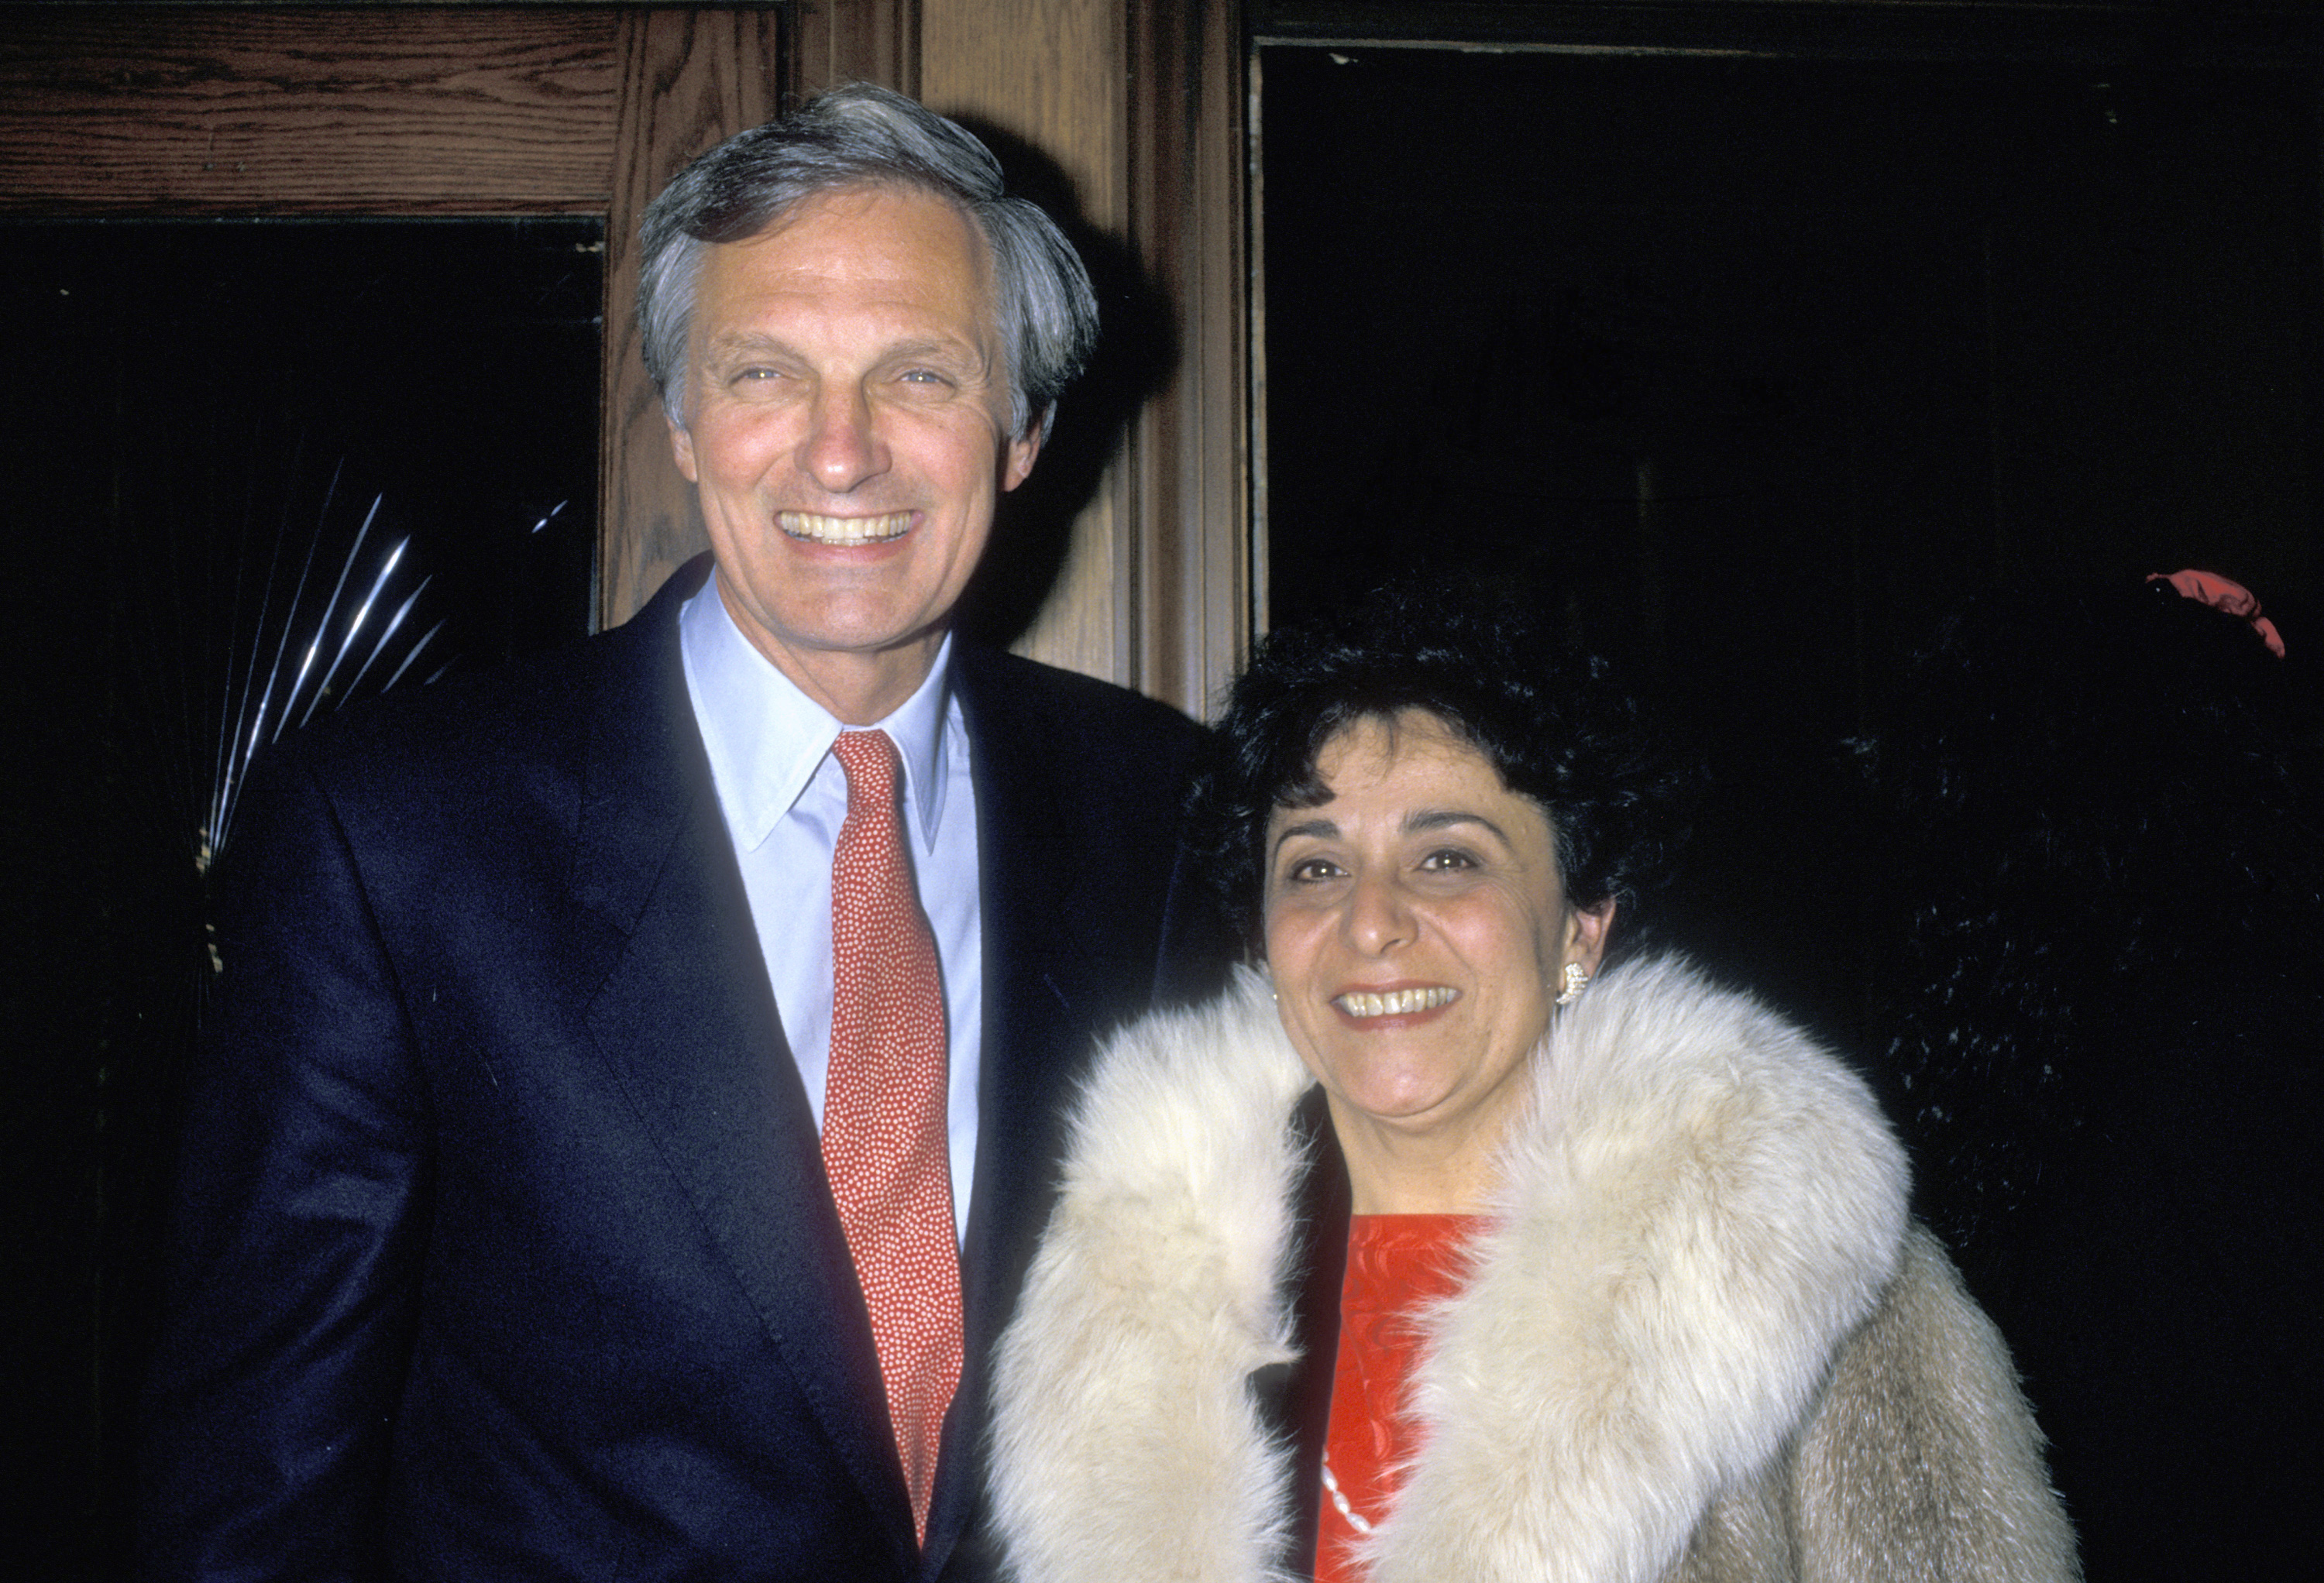 Alan Alda and Arlene Alda at the "A New Life" New York premiere party at Tavern On The Green, in New York, New York. | Source: Getty Images